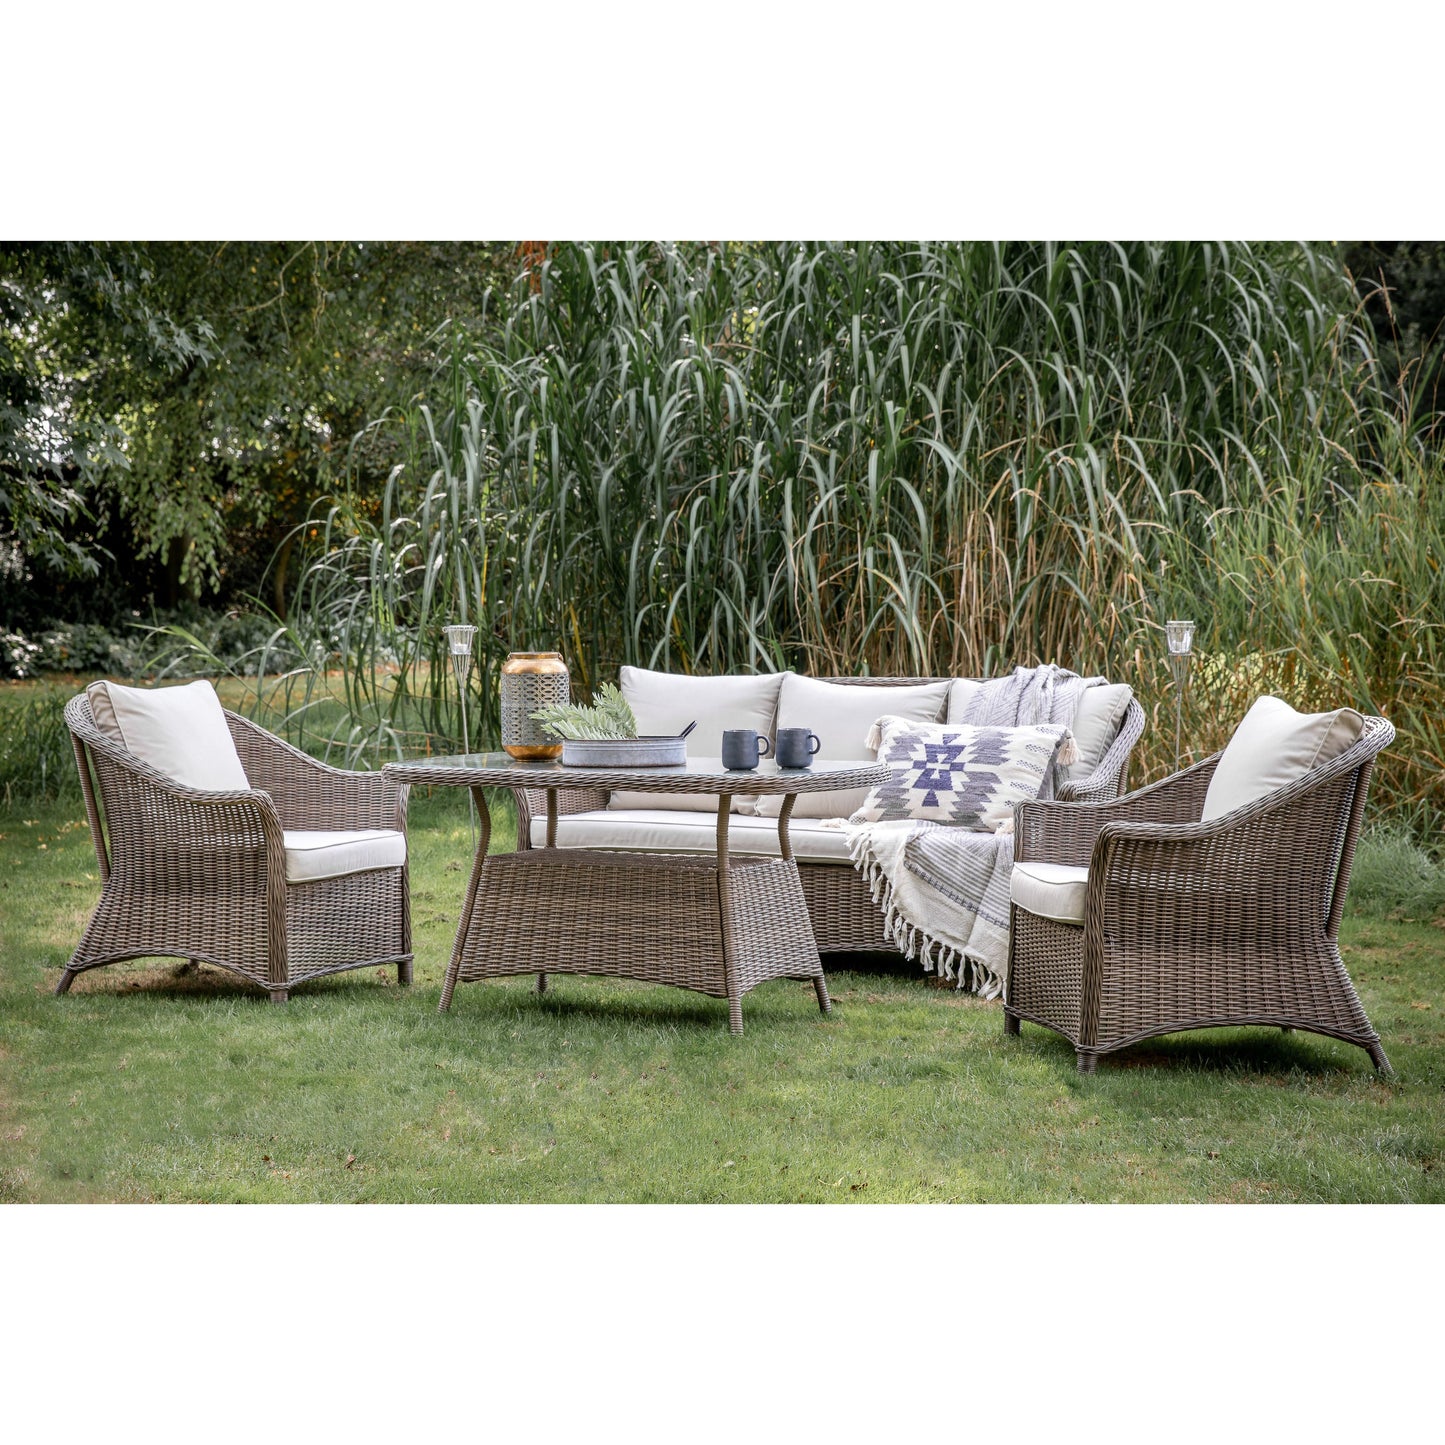 A Dartington Lounge Dining Set Natural for interior decor by Kikiathome.co.uk in a grassy area.